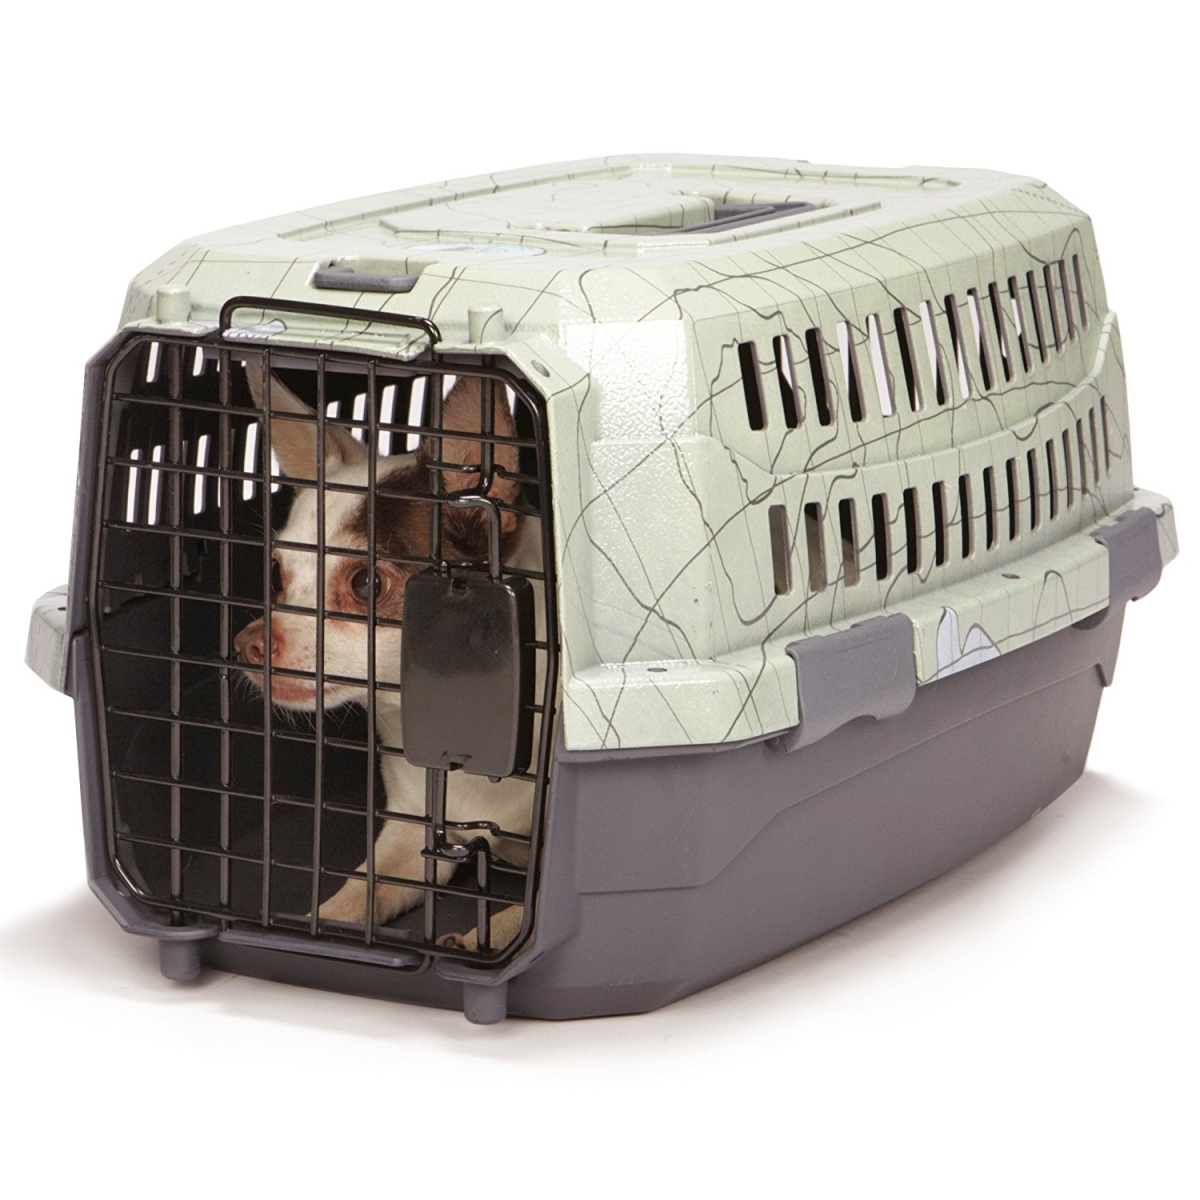 Dog Is Good Travel Alone Crate, Small